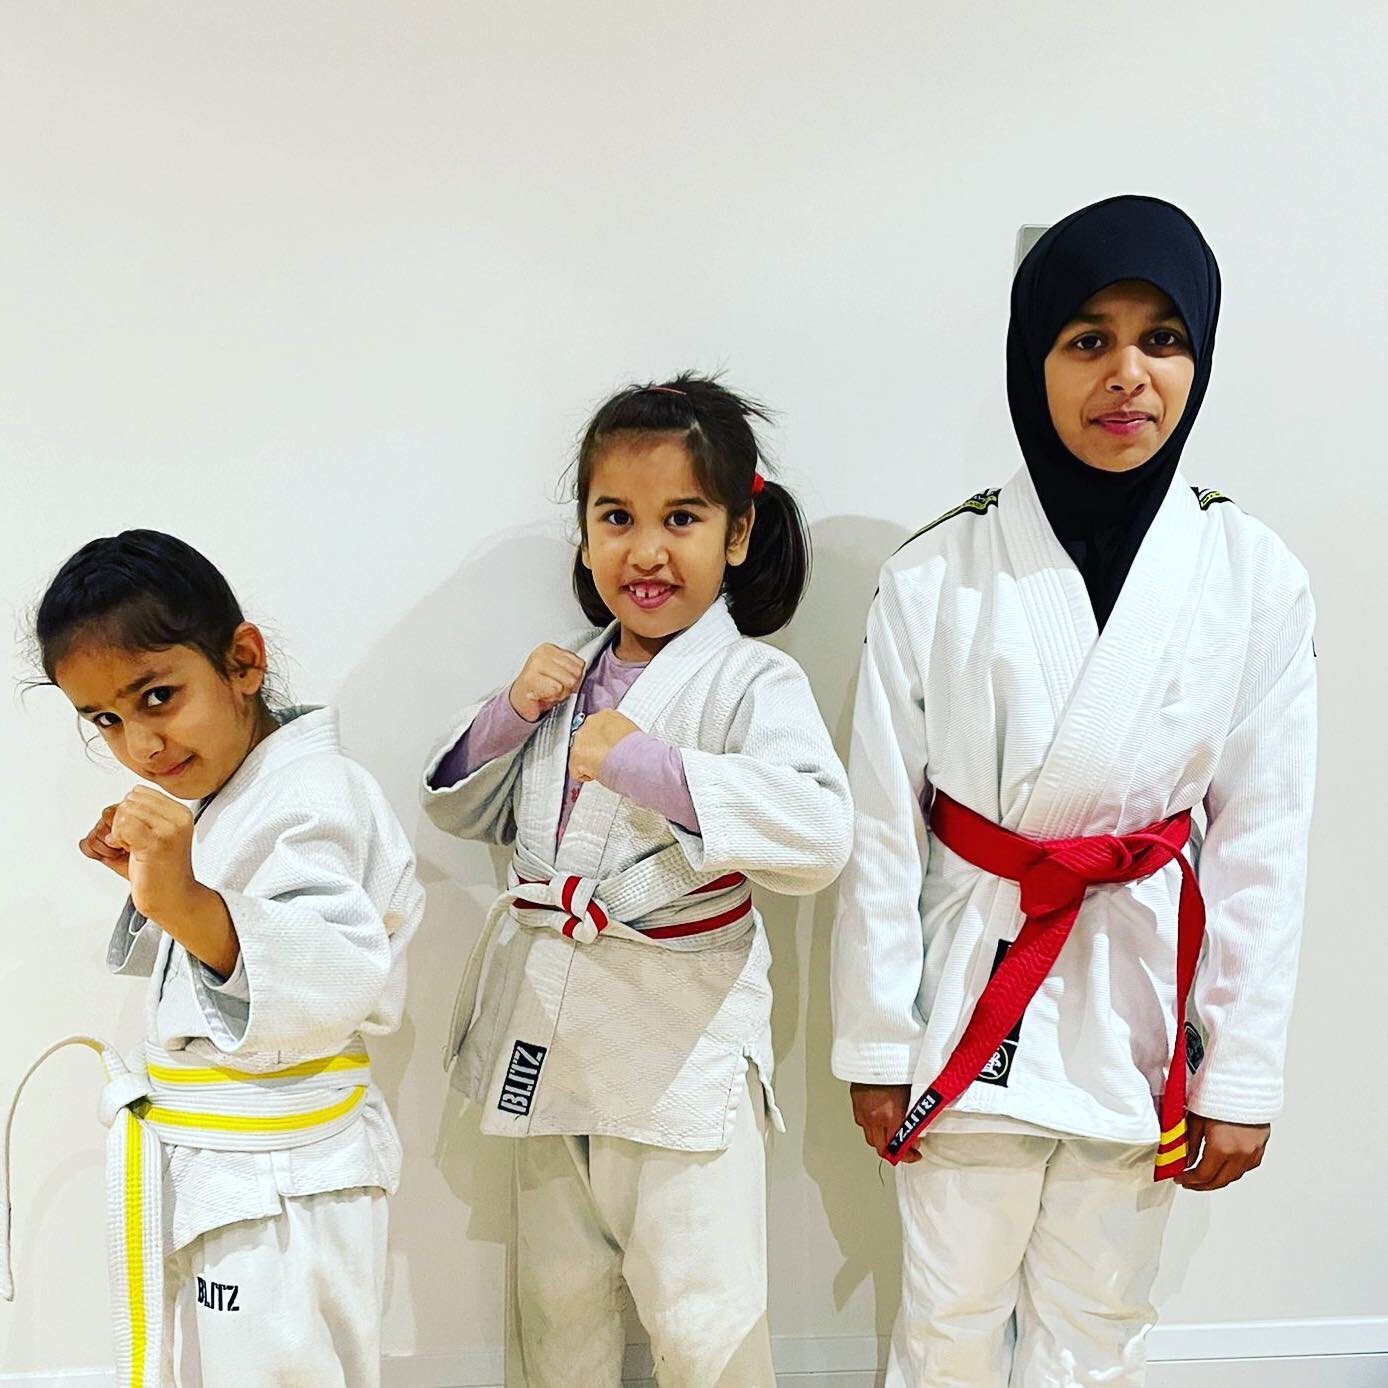 7 reasons why girls should do judo: 

1. It teaches you self defence
2. It builds your confidence 
3. It helps you get fit 
4. You can make new friends
5. It develops your mental toughness 
6. It teaches you how to love yourself 
7. You learn life le